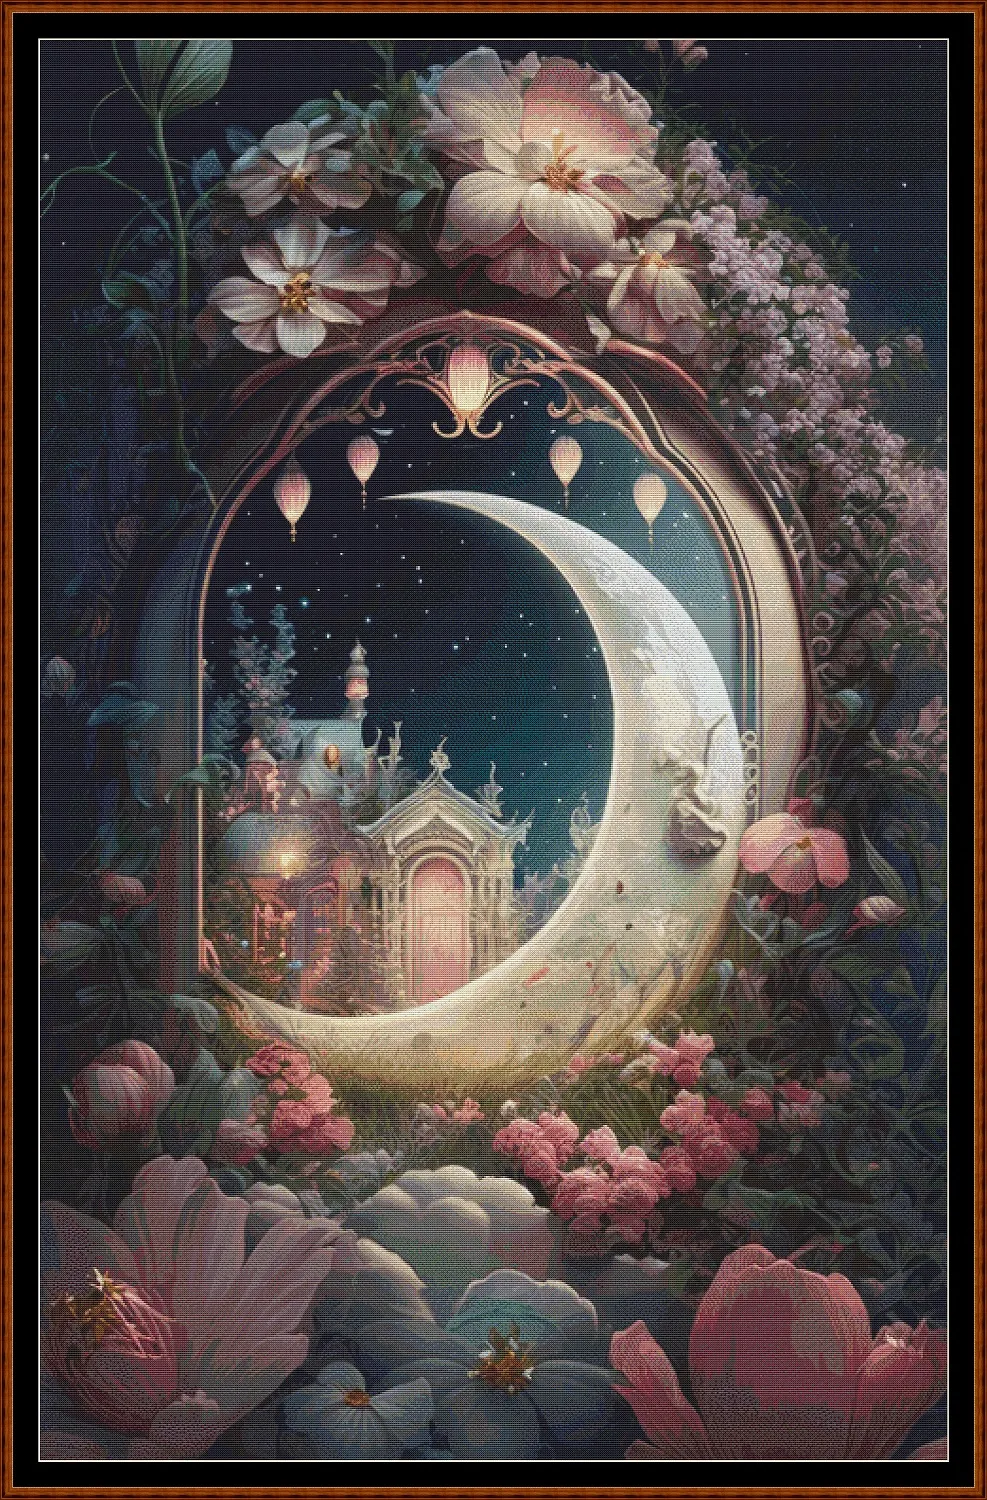 Moonlight Doorway patterns are expertly created from art by Gismi under Public Domain CC0 license